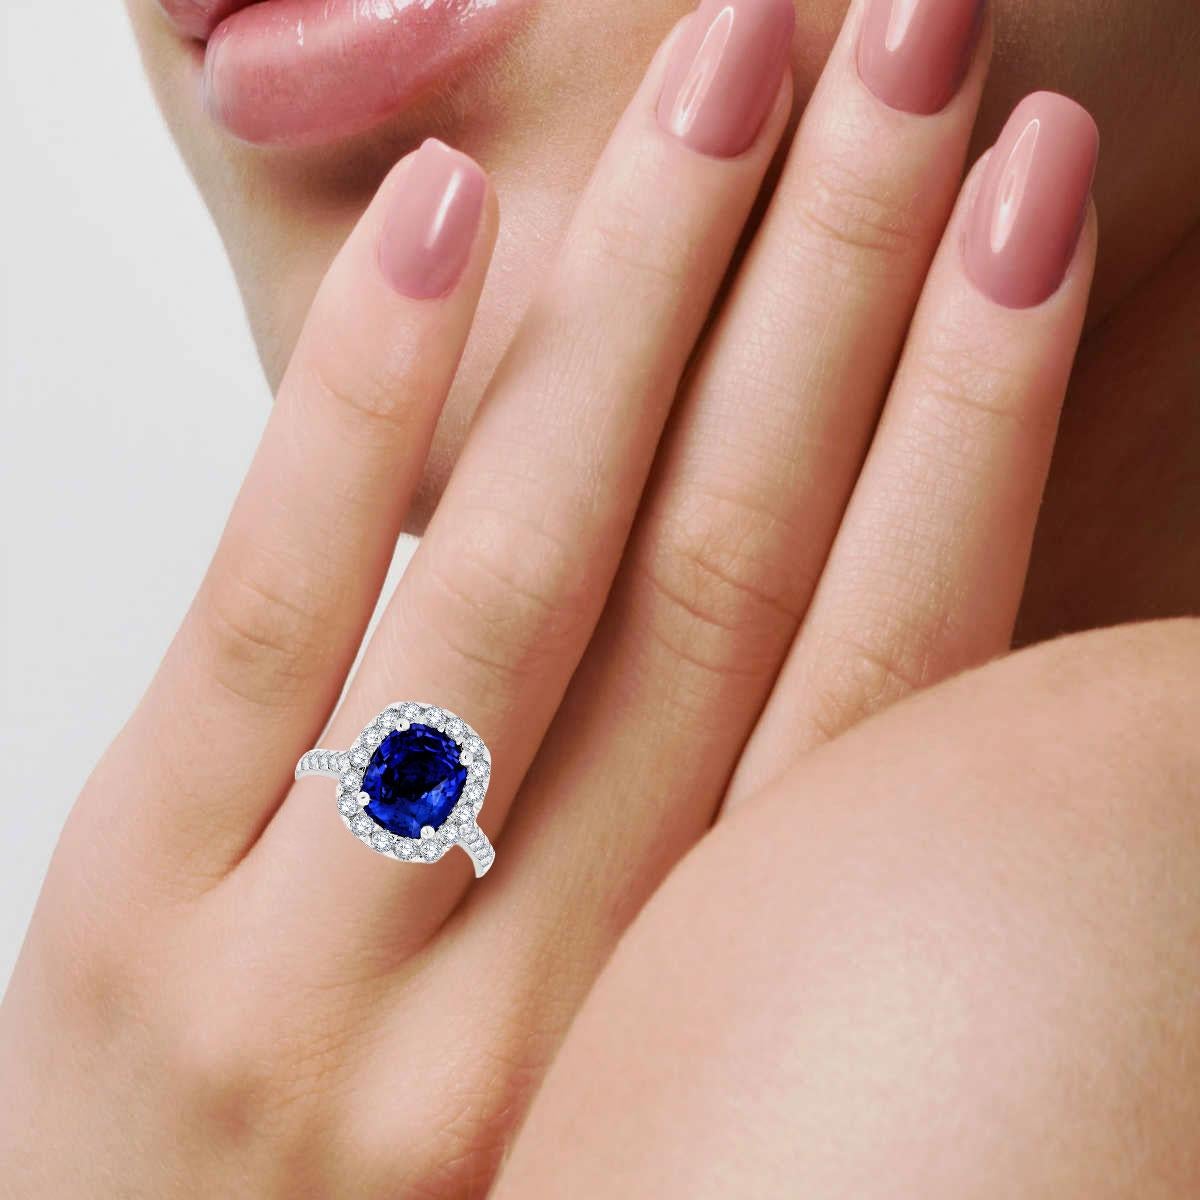 Platinum Elongated Cushion 3.57 Carat Blue Sapphire & Diamond Halo Ring GIA In New Condition For Sale In San Francisco, CA